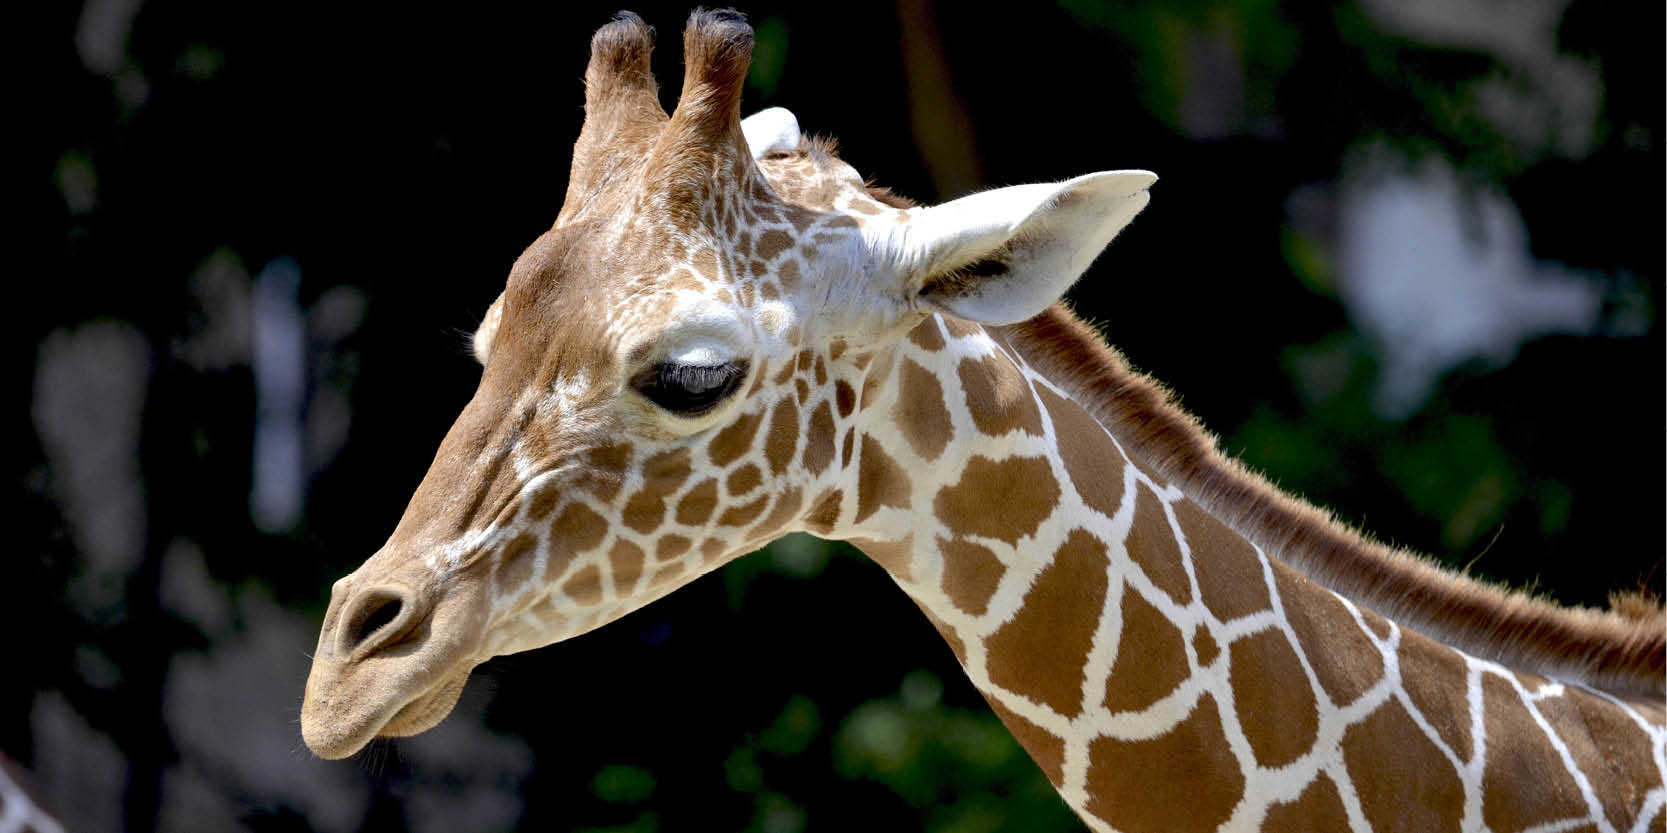 Predictive tracking technology to assist in the conservation of reticulated giraffes